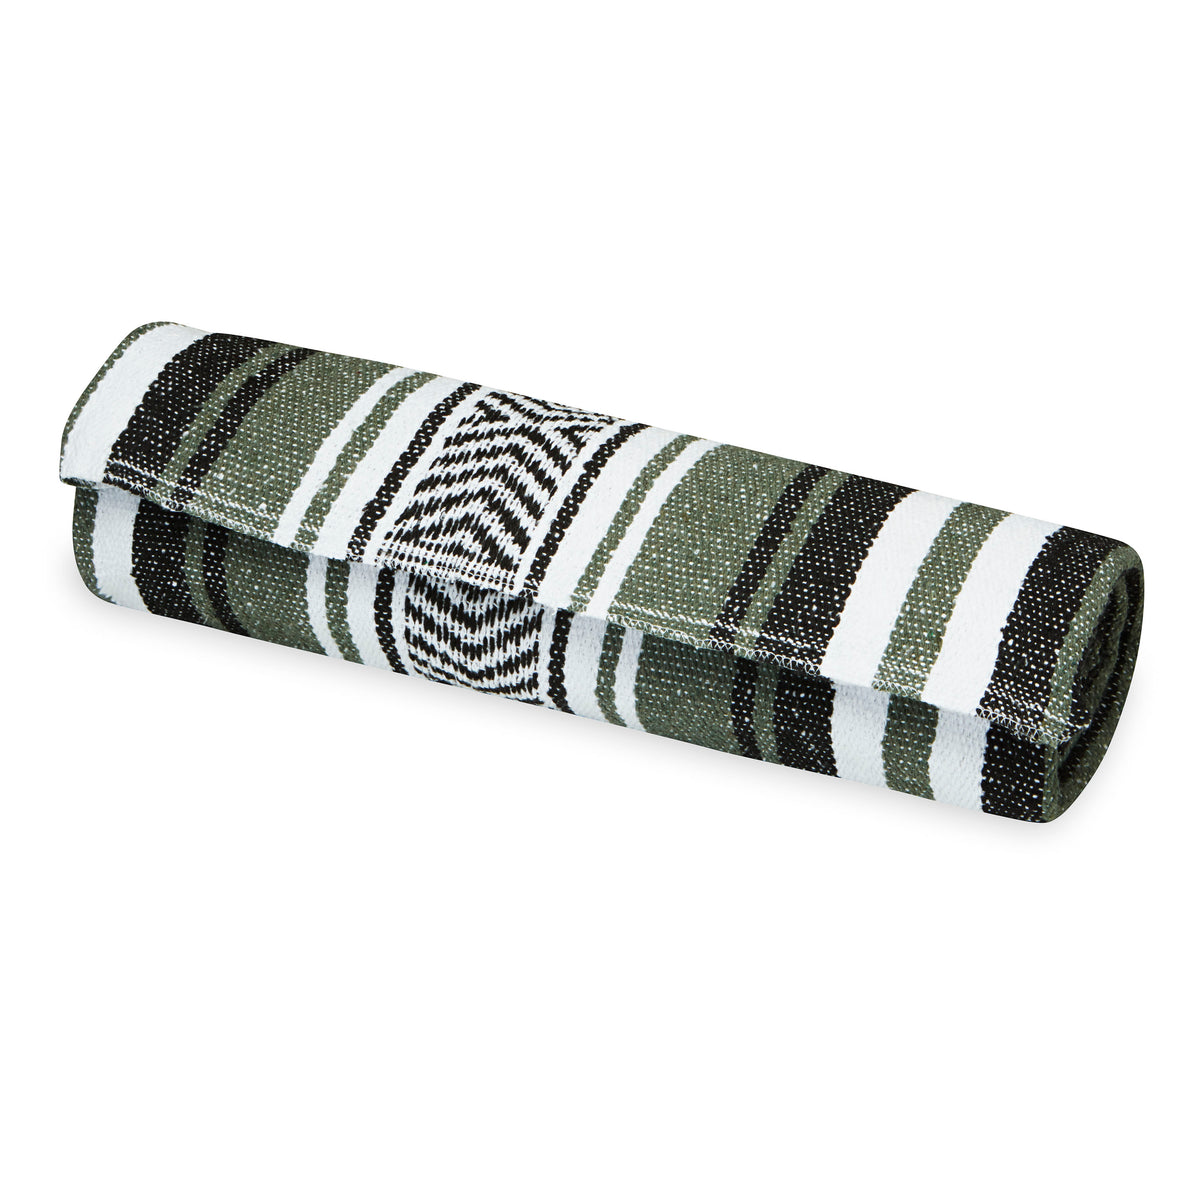 Traditional Mexican Woven Blanket Olive/White/Black rolled up